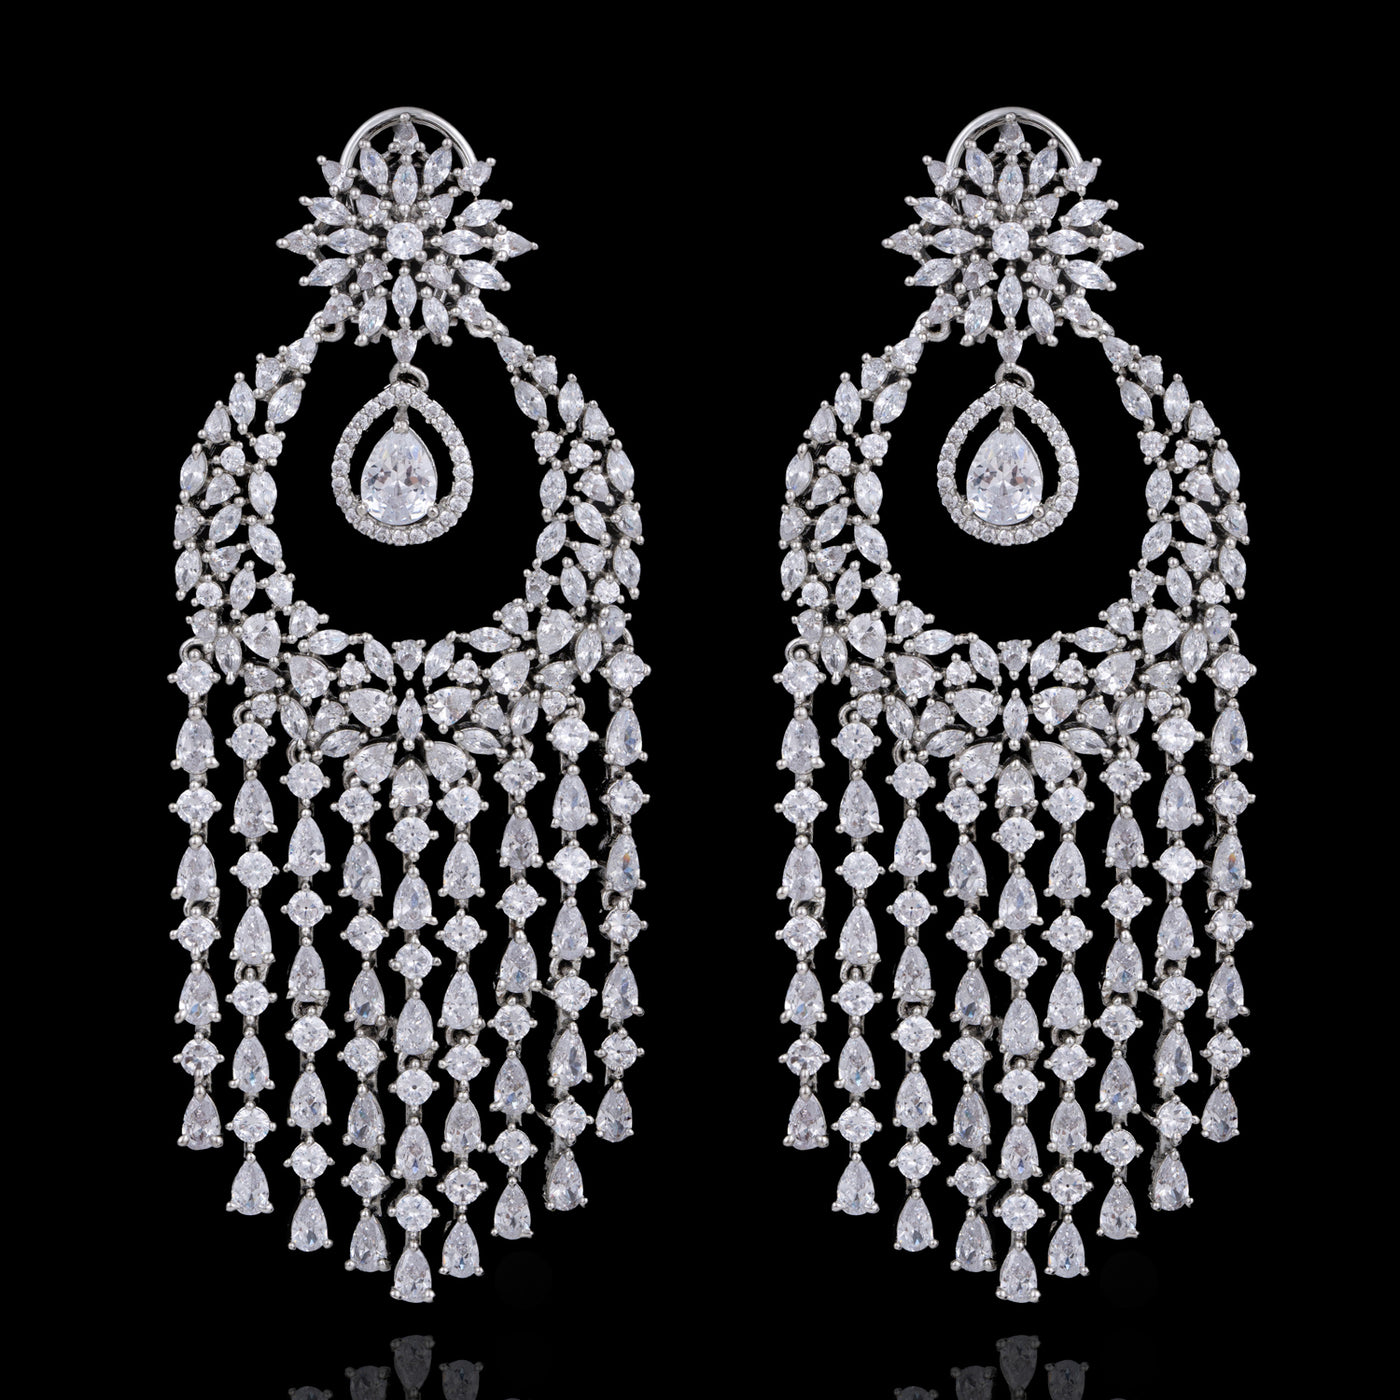 Stella Earrings - Available in 2 Options